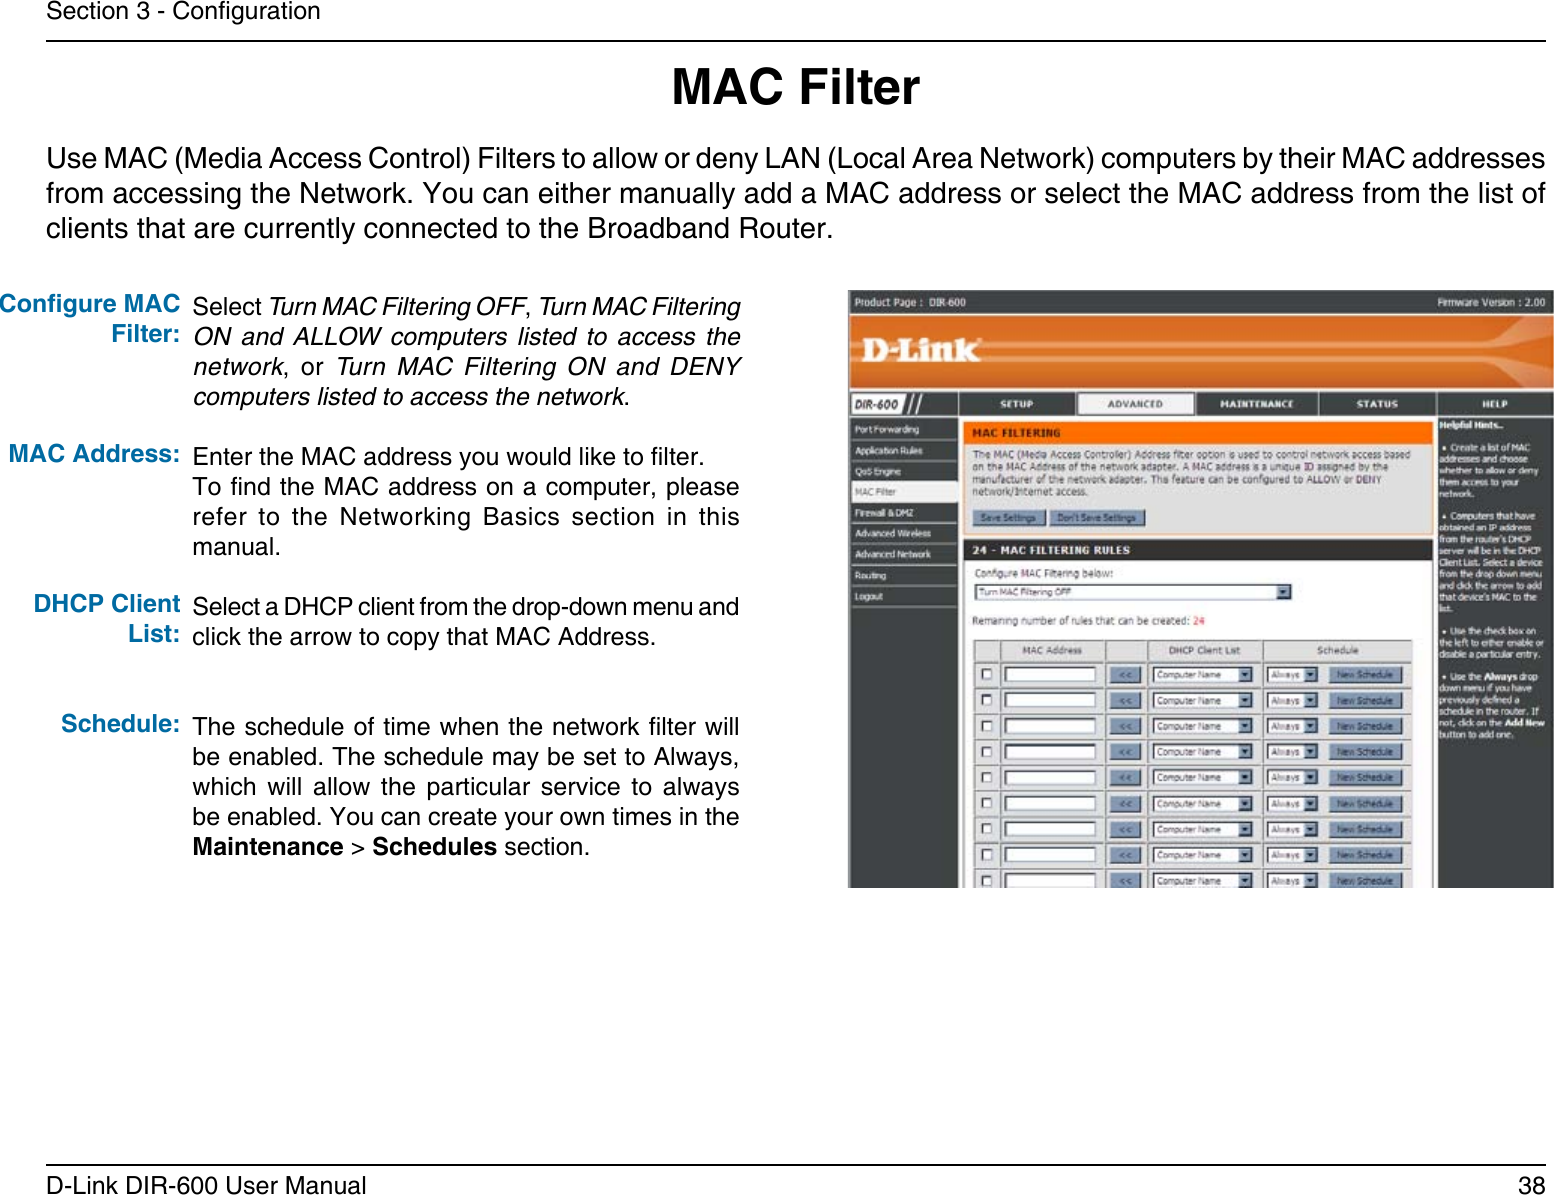 38D-Link DIR-600 User ManualSection 3 - CongurationMAC FilterSelect Turn MAC Filtering OFF, Turn MAC Filtering ON  and  ALLOW  computers  listed  to  access  the network,  or  Turn  MAC  Filtering  ON  and  DENY computers listed to access the network. Enter the MAC address you would like to lter.To nd the MAC address on a computer, please refer  to  the  Networking  Basics  section  in  this manual.Select a DHCP client from the drop-down menu and click the arrow to copy that MAC Address. The schedule of time when the network lter will be enabled. The schedule may be set to Always, which  will  allow  the  particular  service  to  always be enabled. You can create your own times in the Maintenance &gt; Schedules section.Congure MAC Filter:MAC Address: DHCP Client List:Schedule:Use MAC (Media Access Control) Filters to allow or deny LAN (Local Area Network) computers by their MAC addresses from accessing the Network. You can either manually add a MAC address or select the MAC address from the list of clients that are currently connected to the Broadband Router.